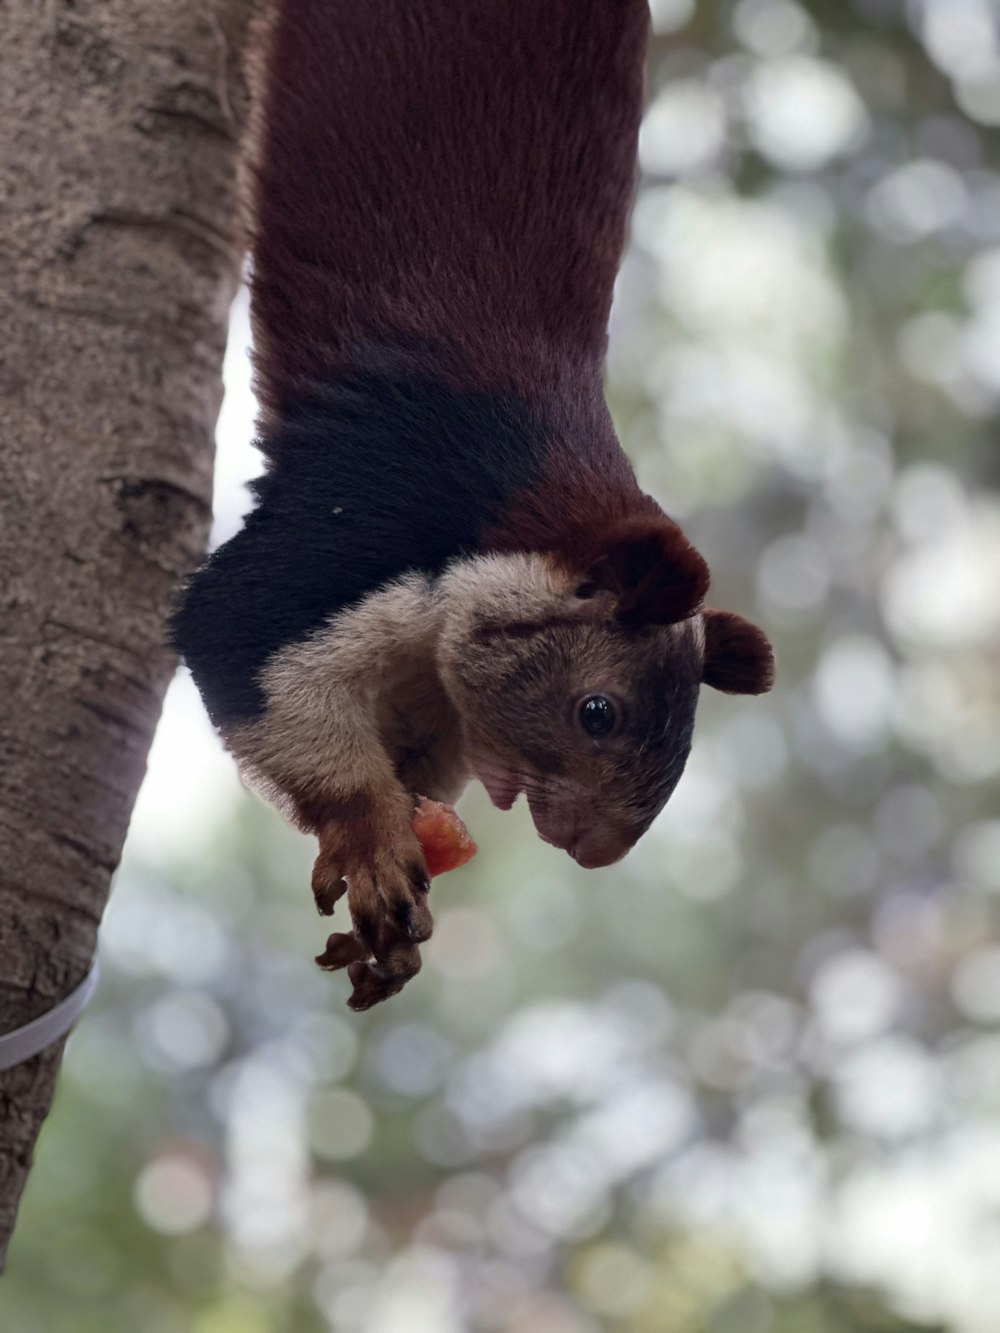 a small animal hanging upside down from a tree